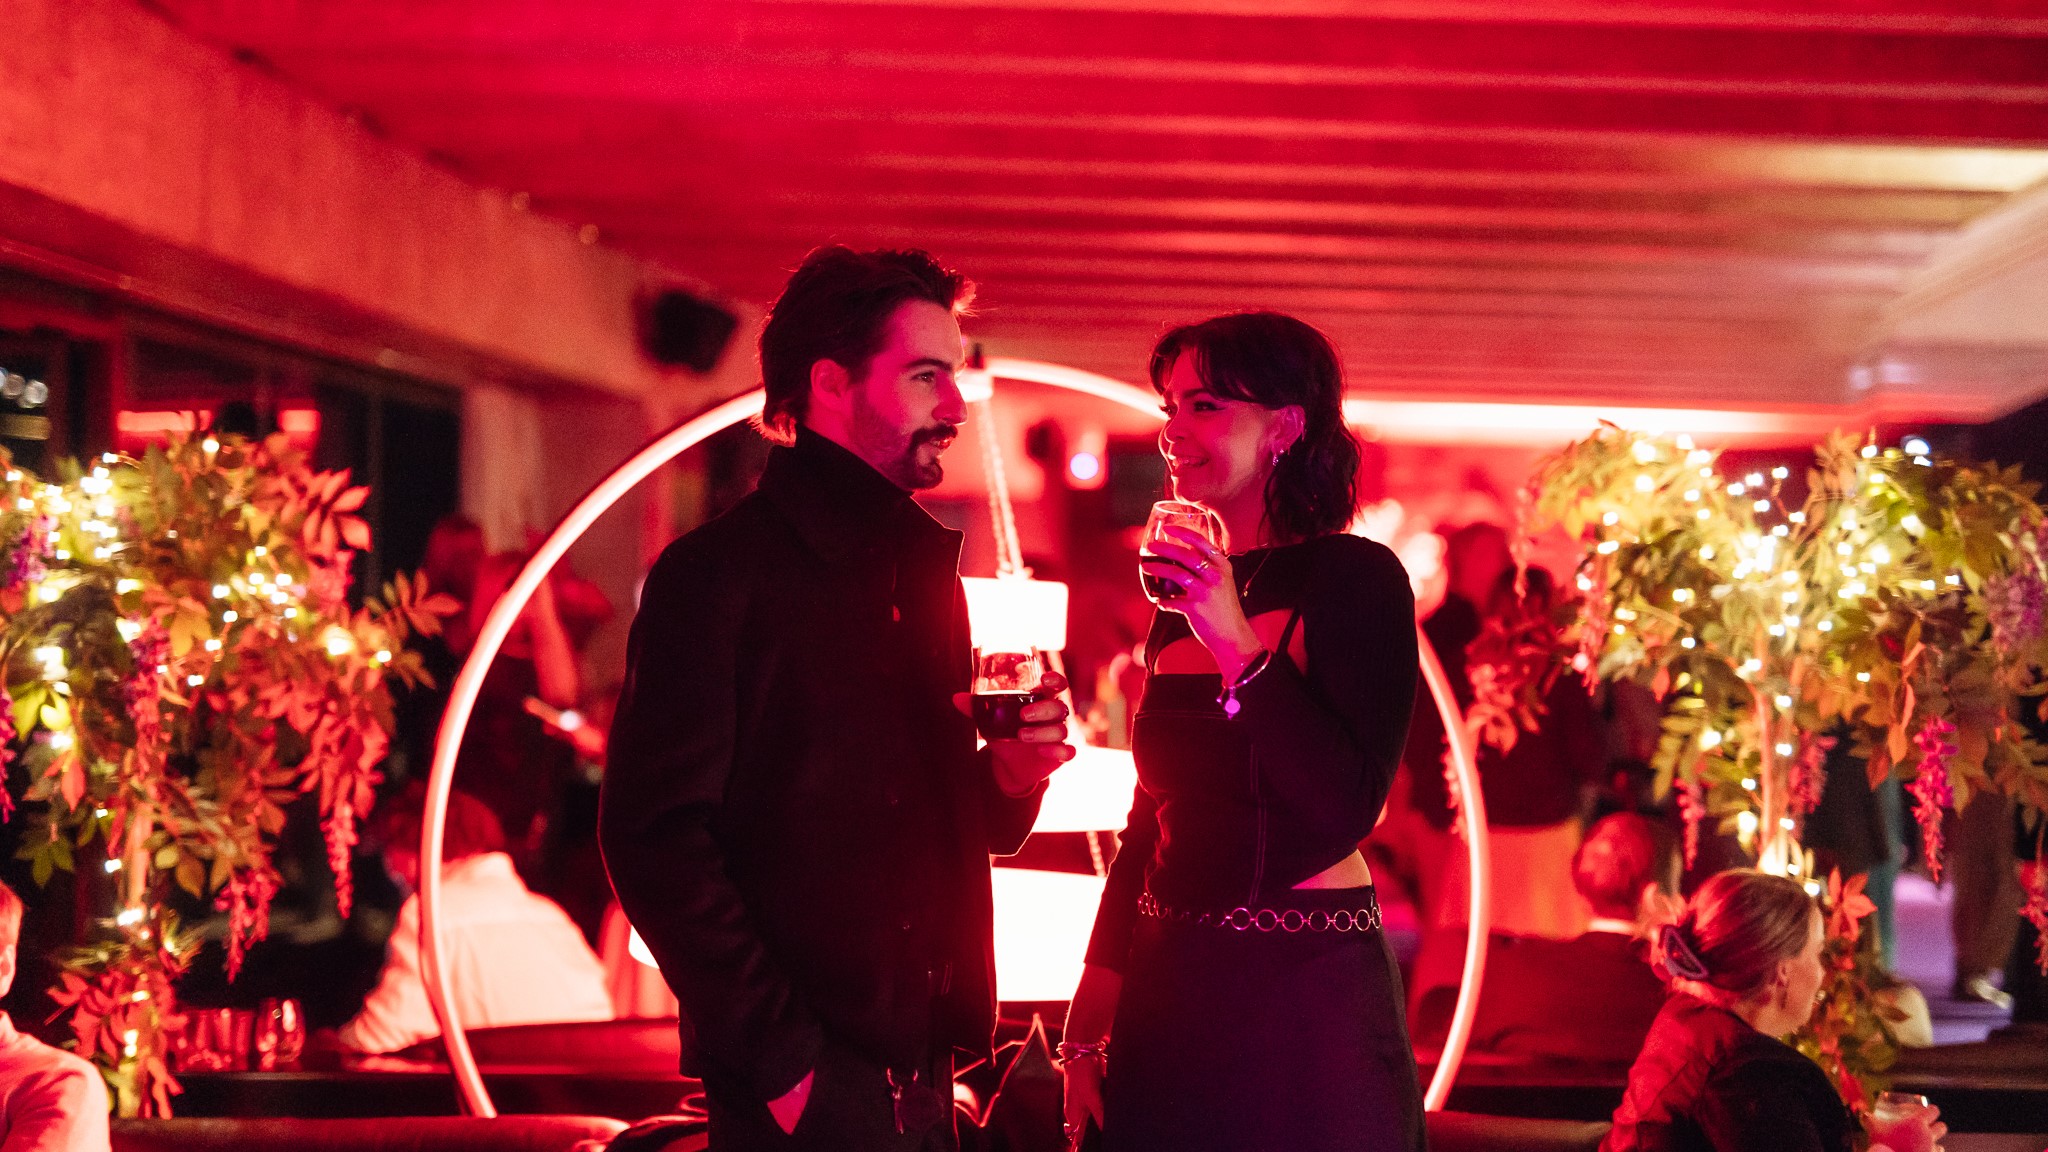 A white man with brown hair and a beard stands next to a white woman with short brown hair talking and drinking red wine, surrounded by red ambient light.